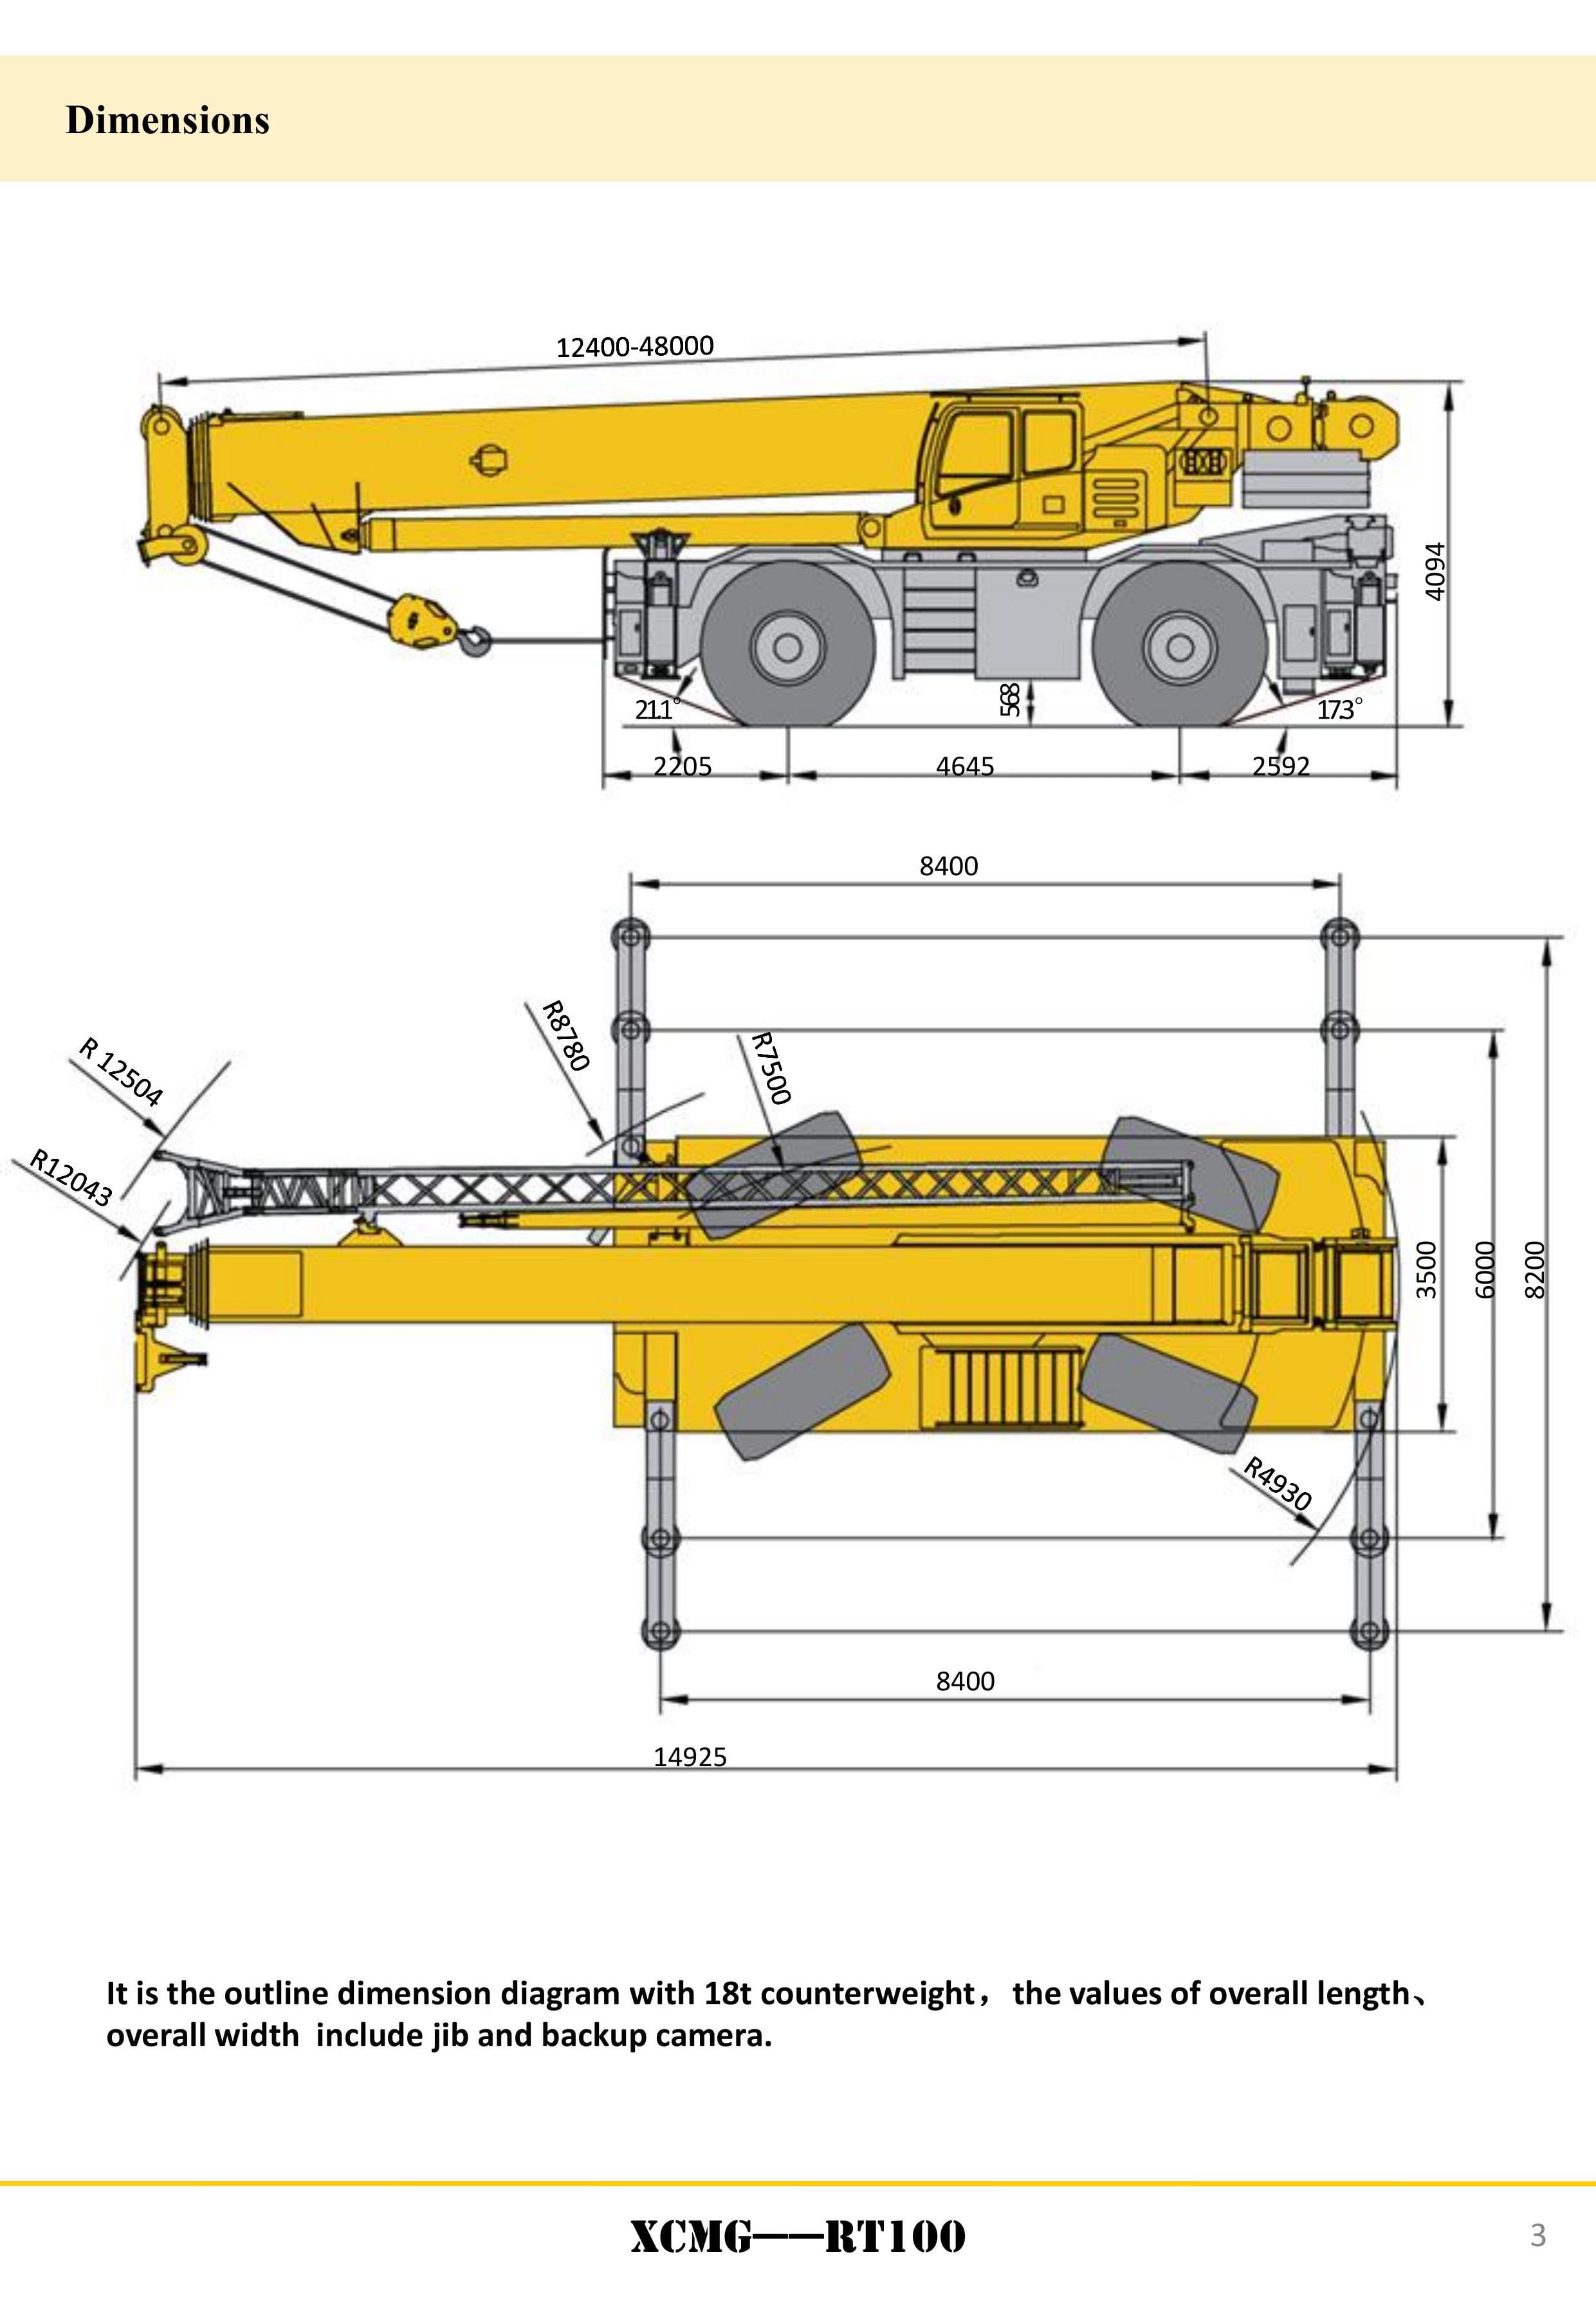 XCMG Official RT100 Rough Terrain Crane for sale